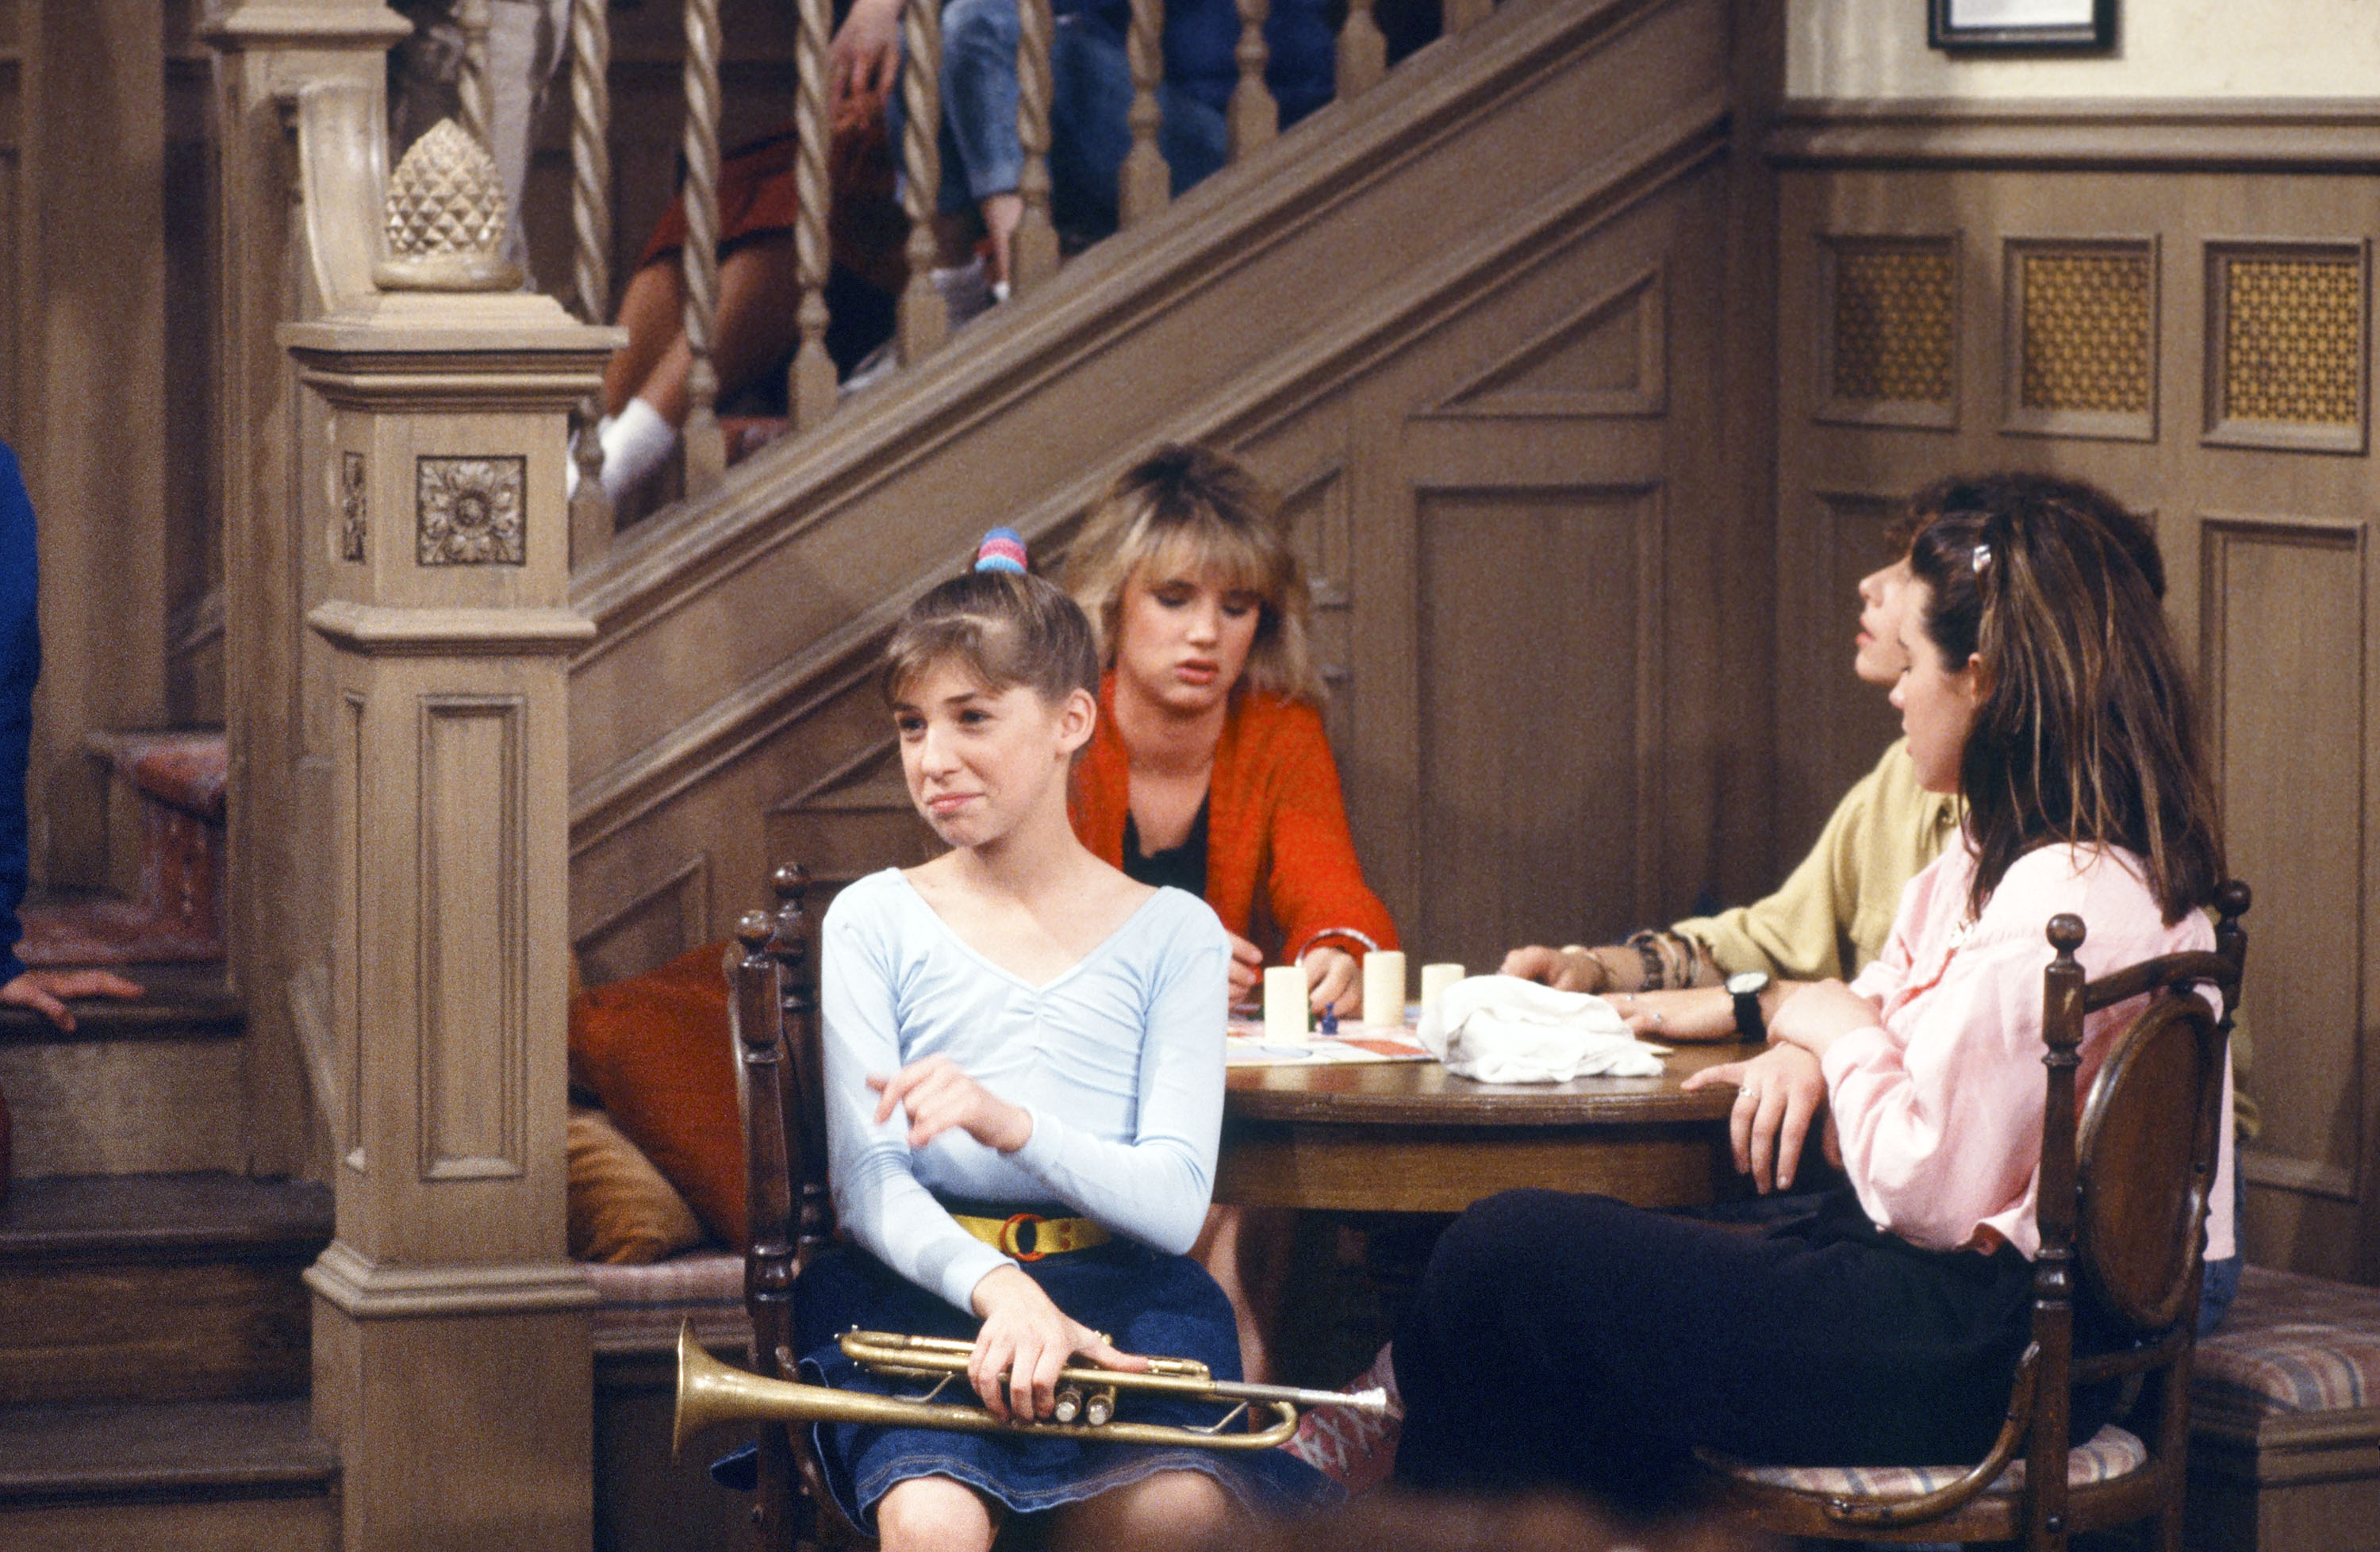 Mayim Bialik on The Facts of Life